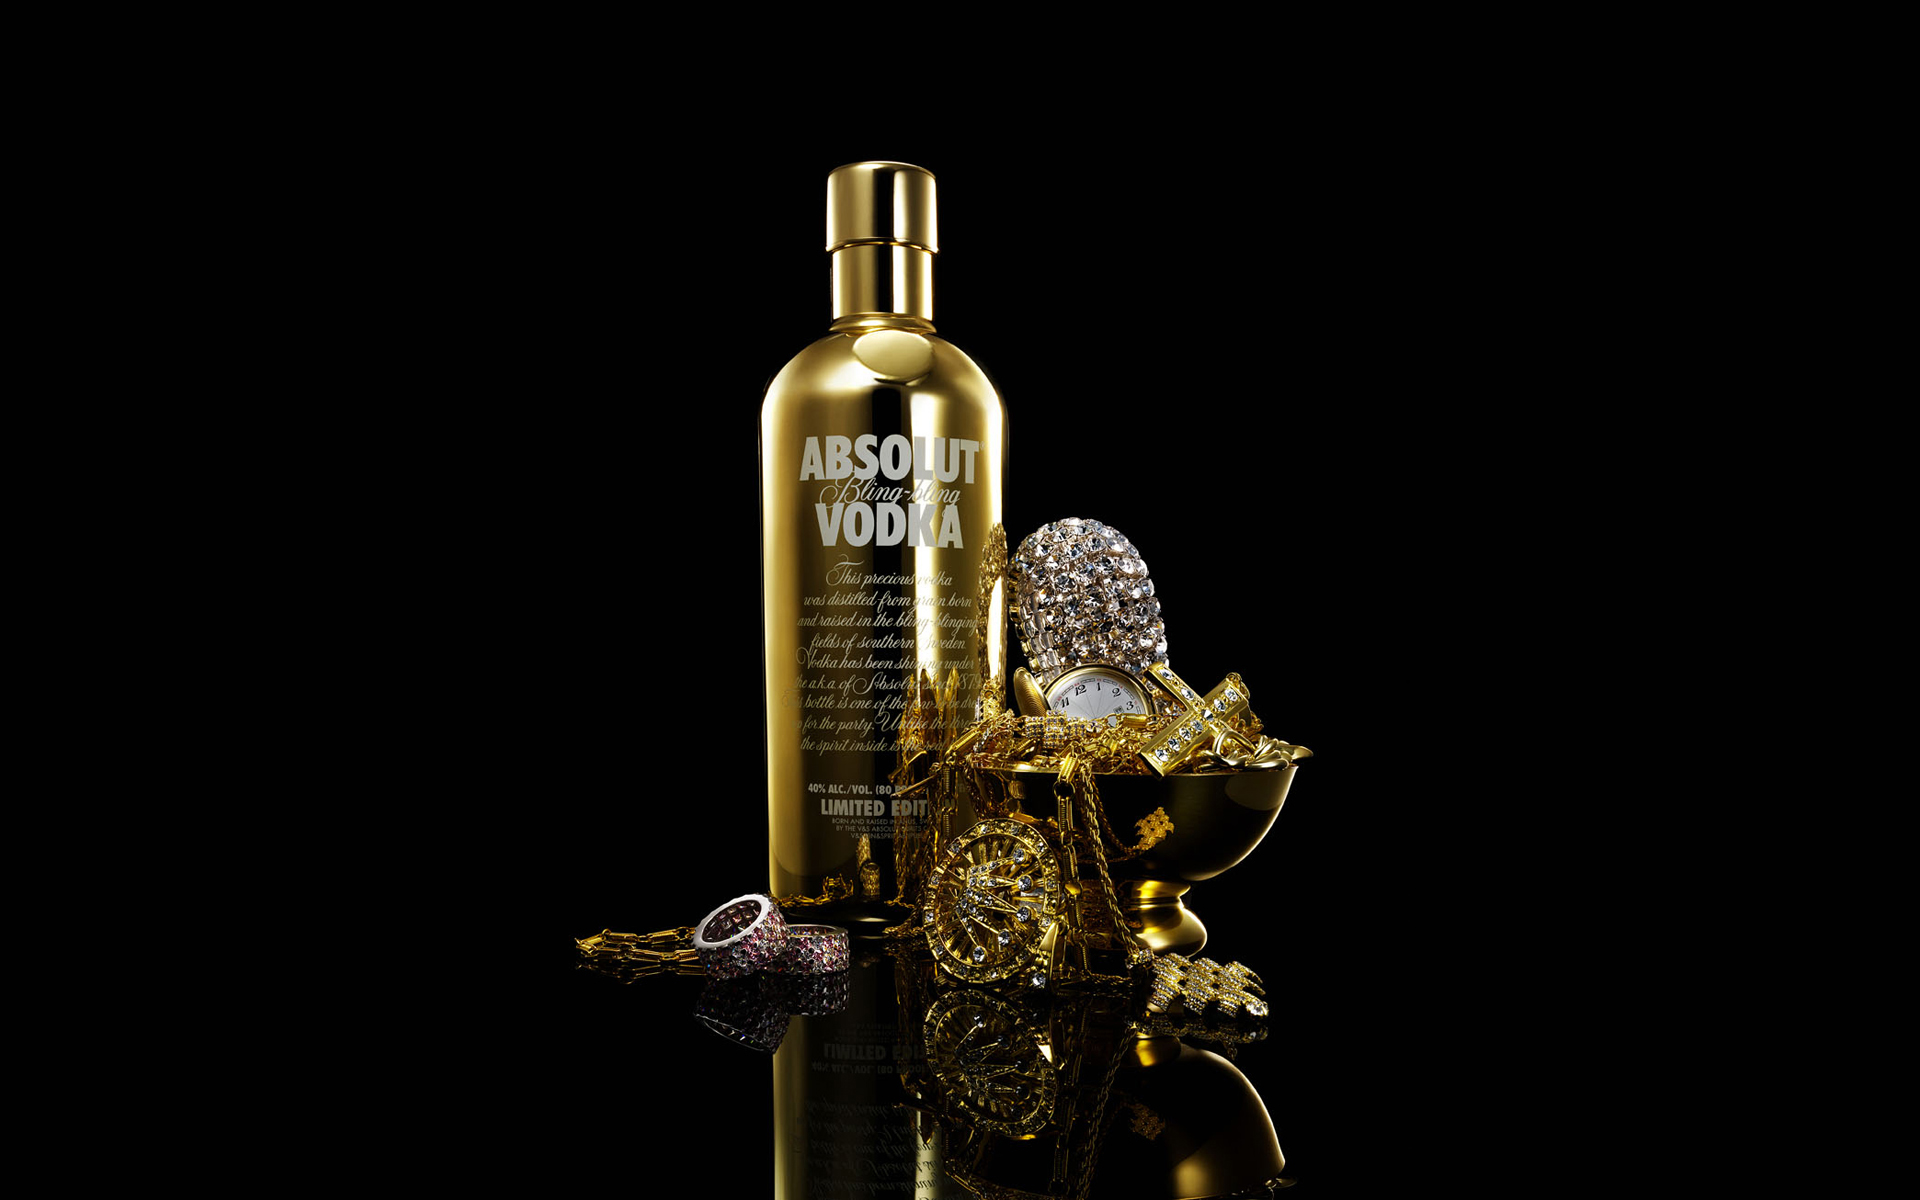 The Absolut Gold Wallpaper iPhone